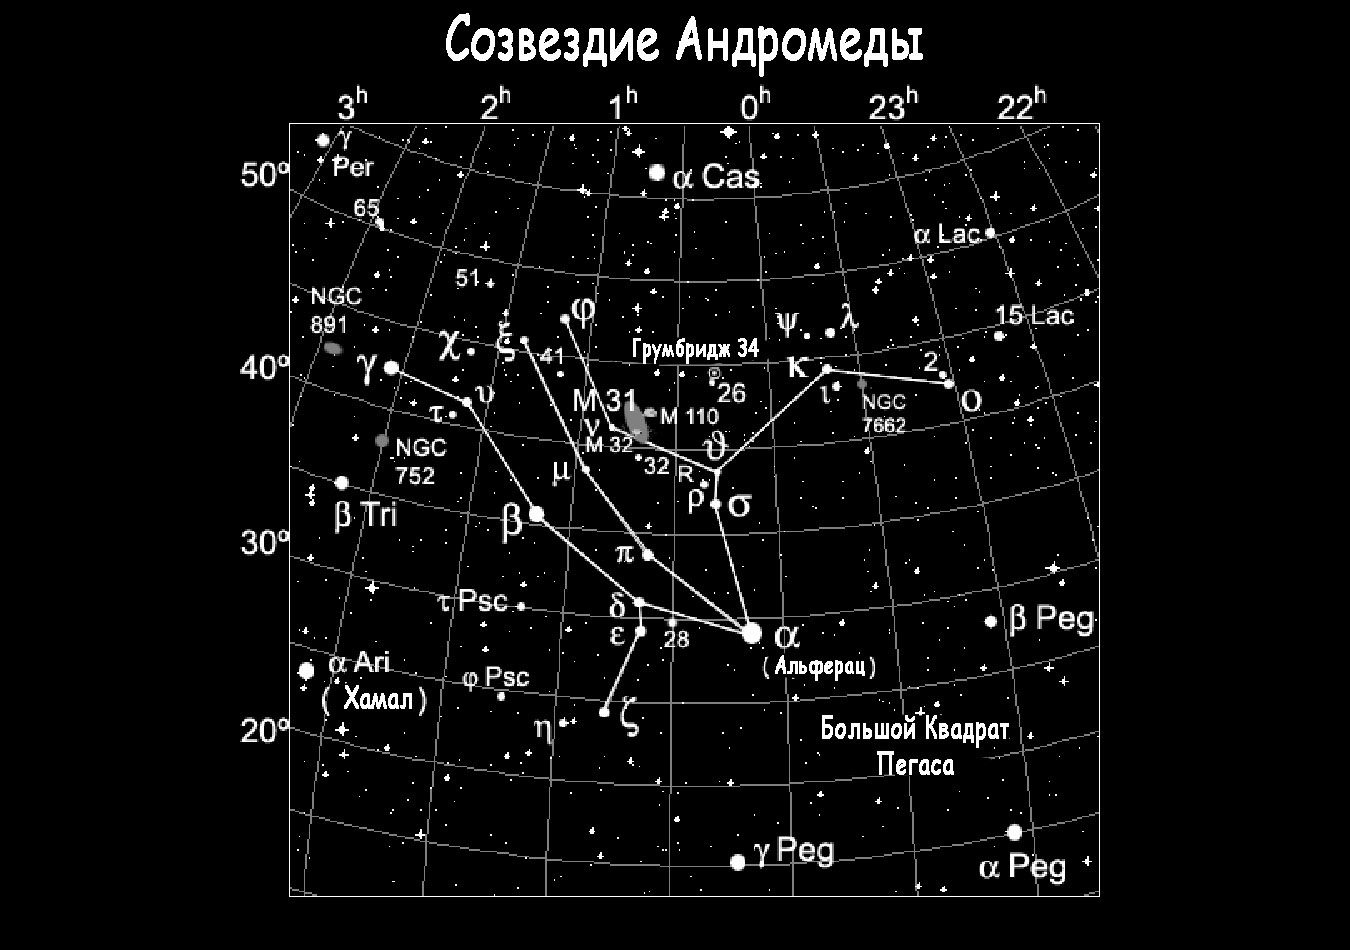 Constellation d'Andromède